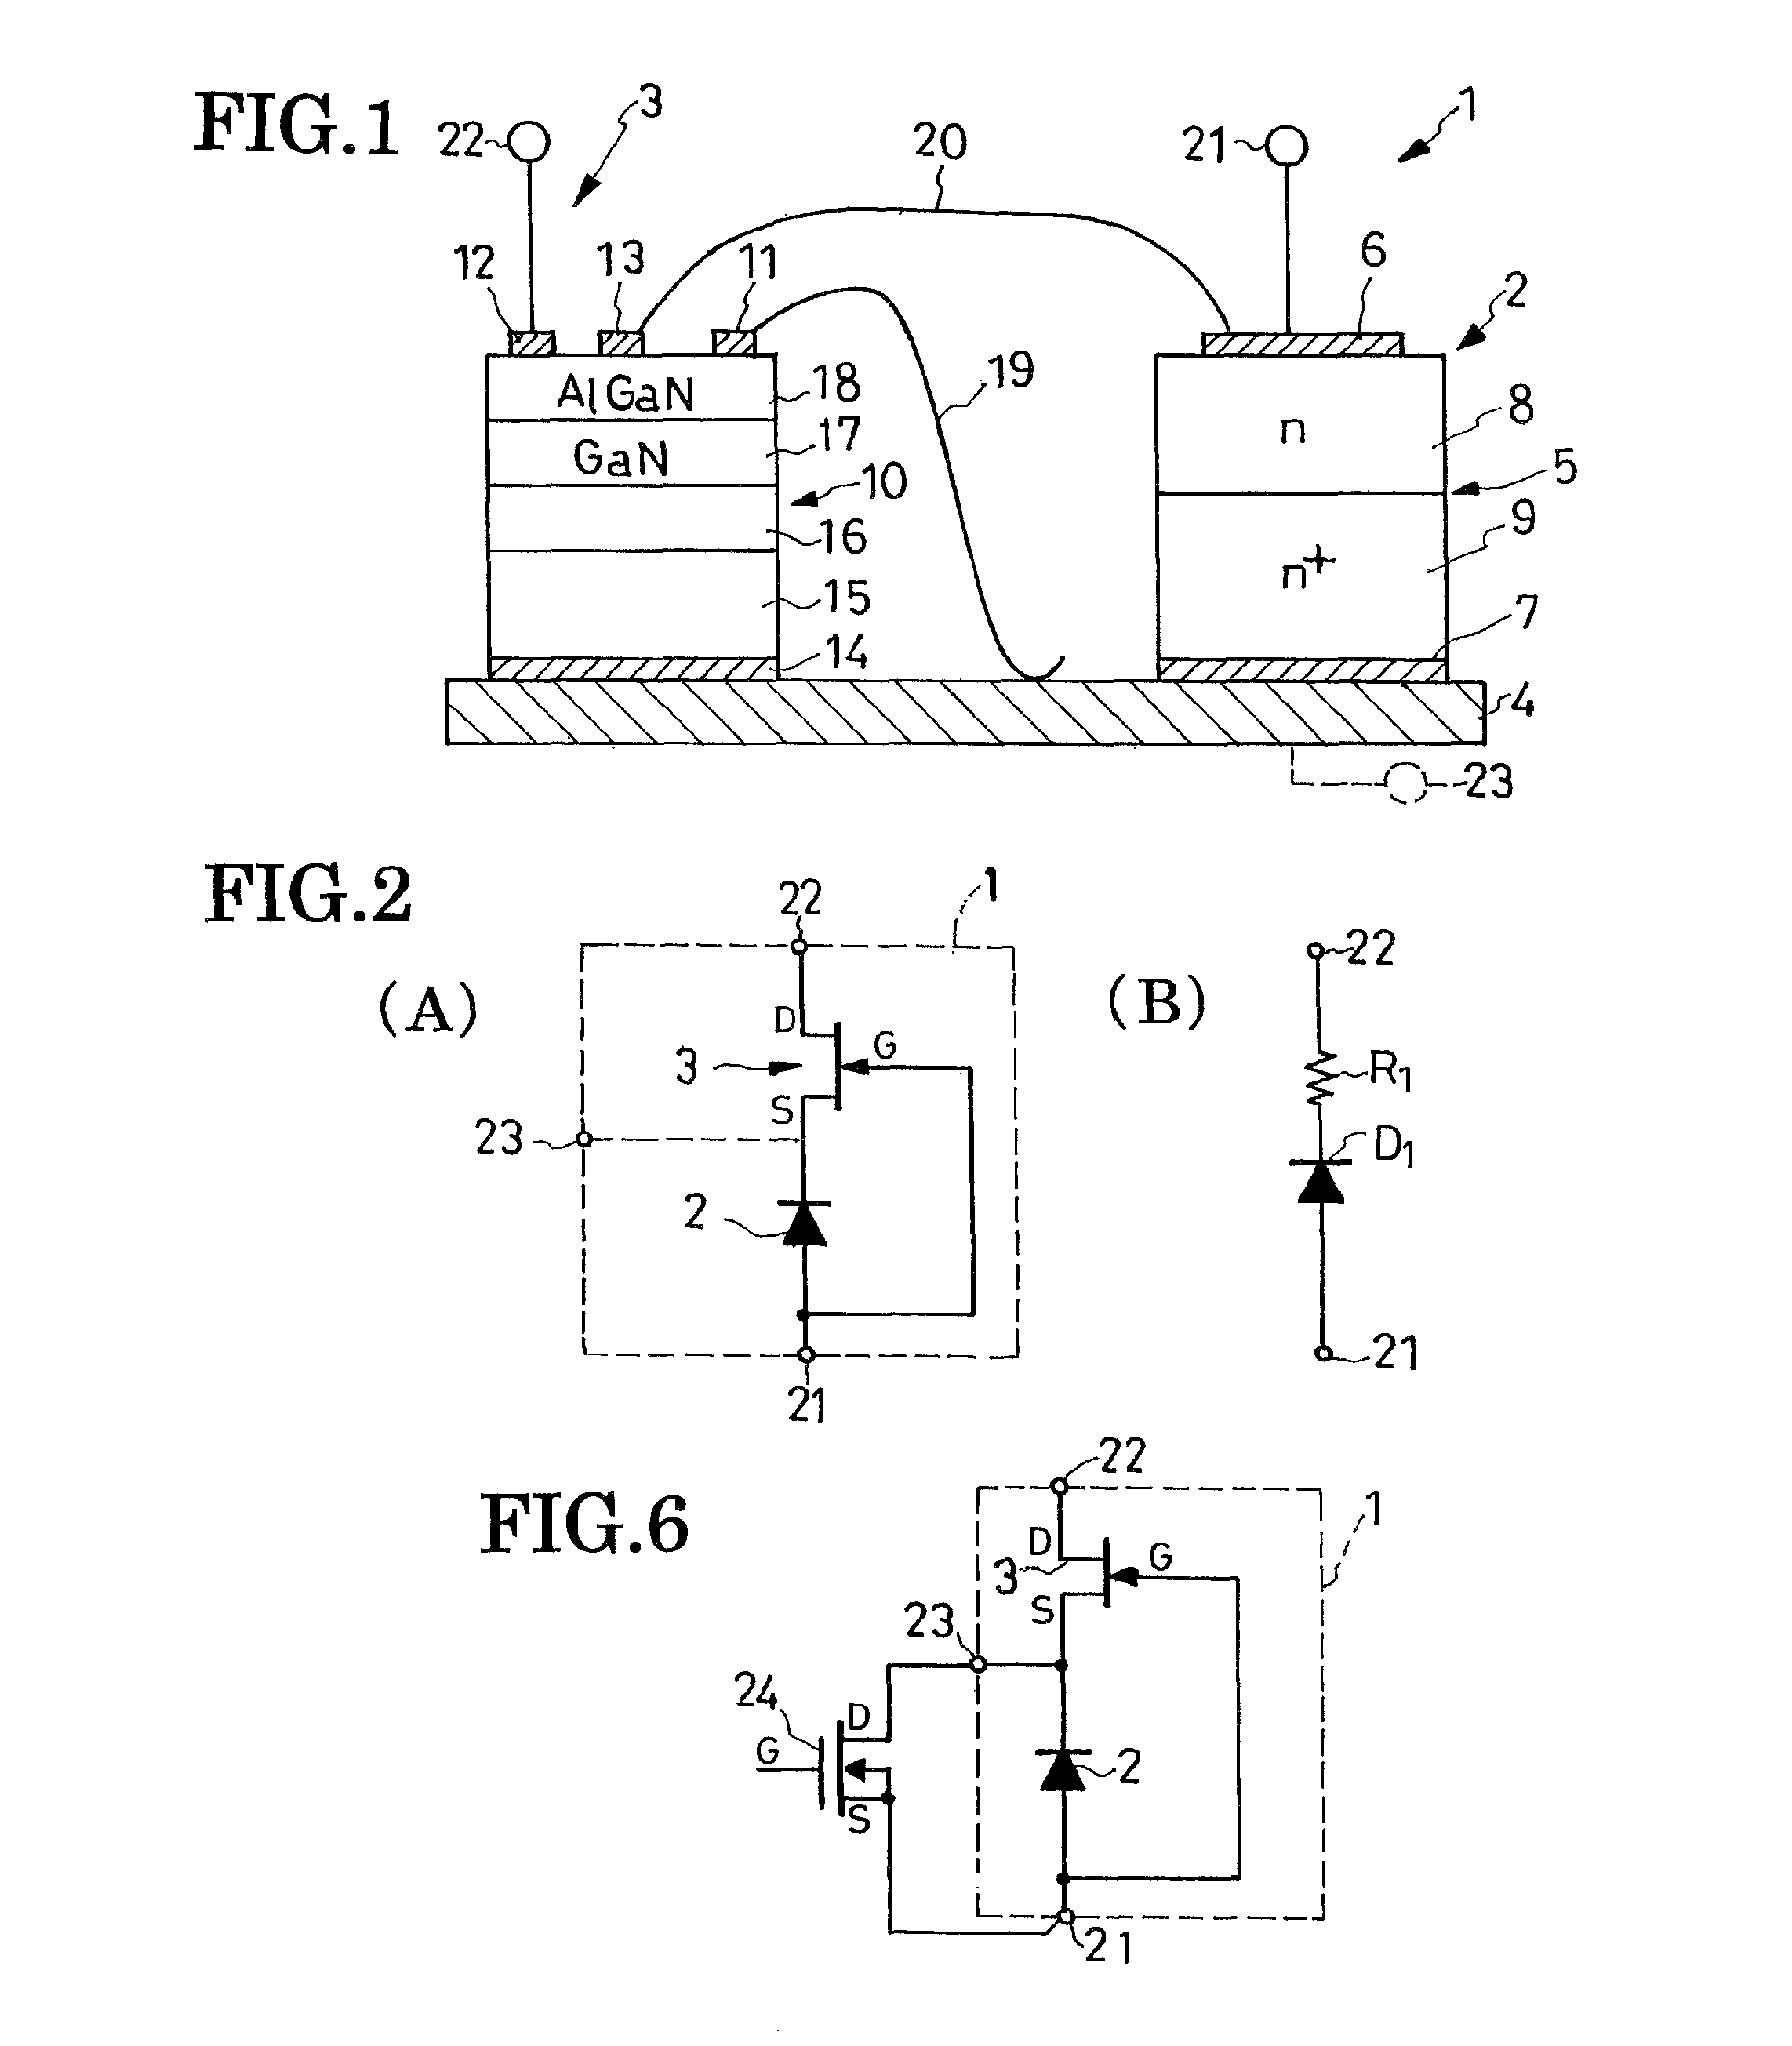 Diode-like composite semiconductor device